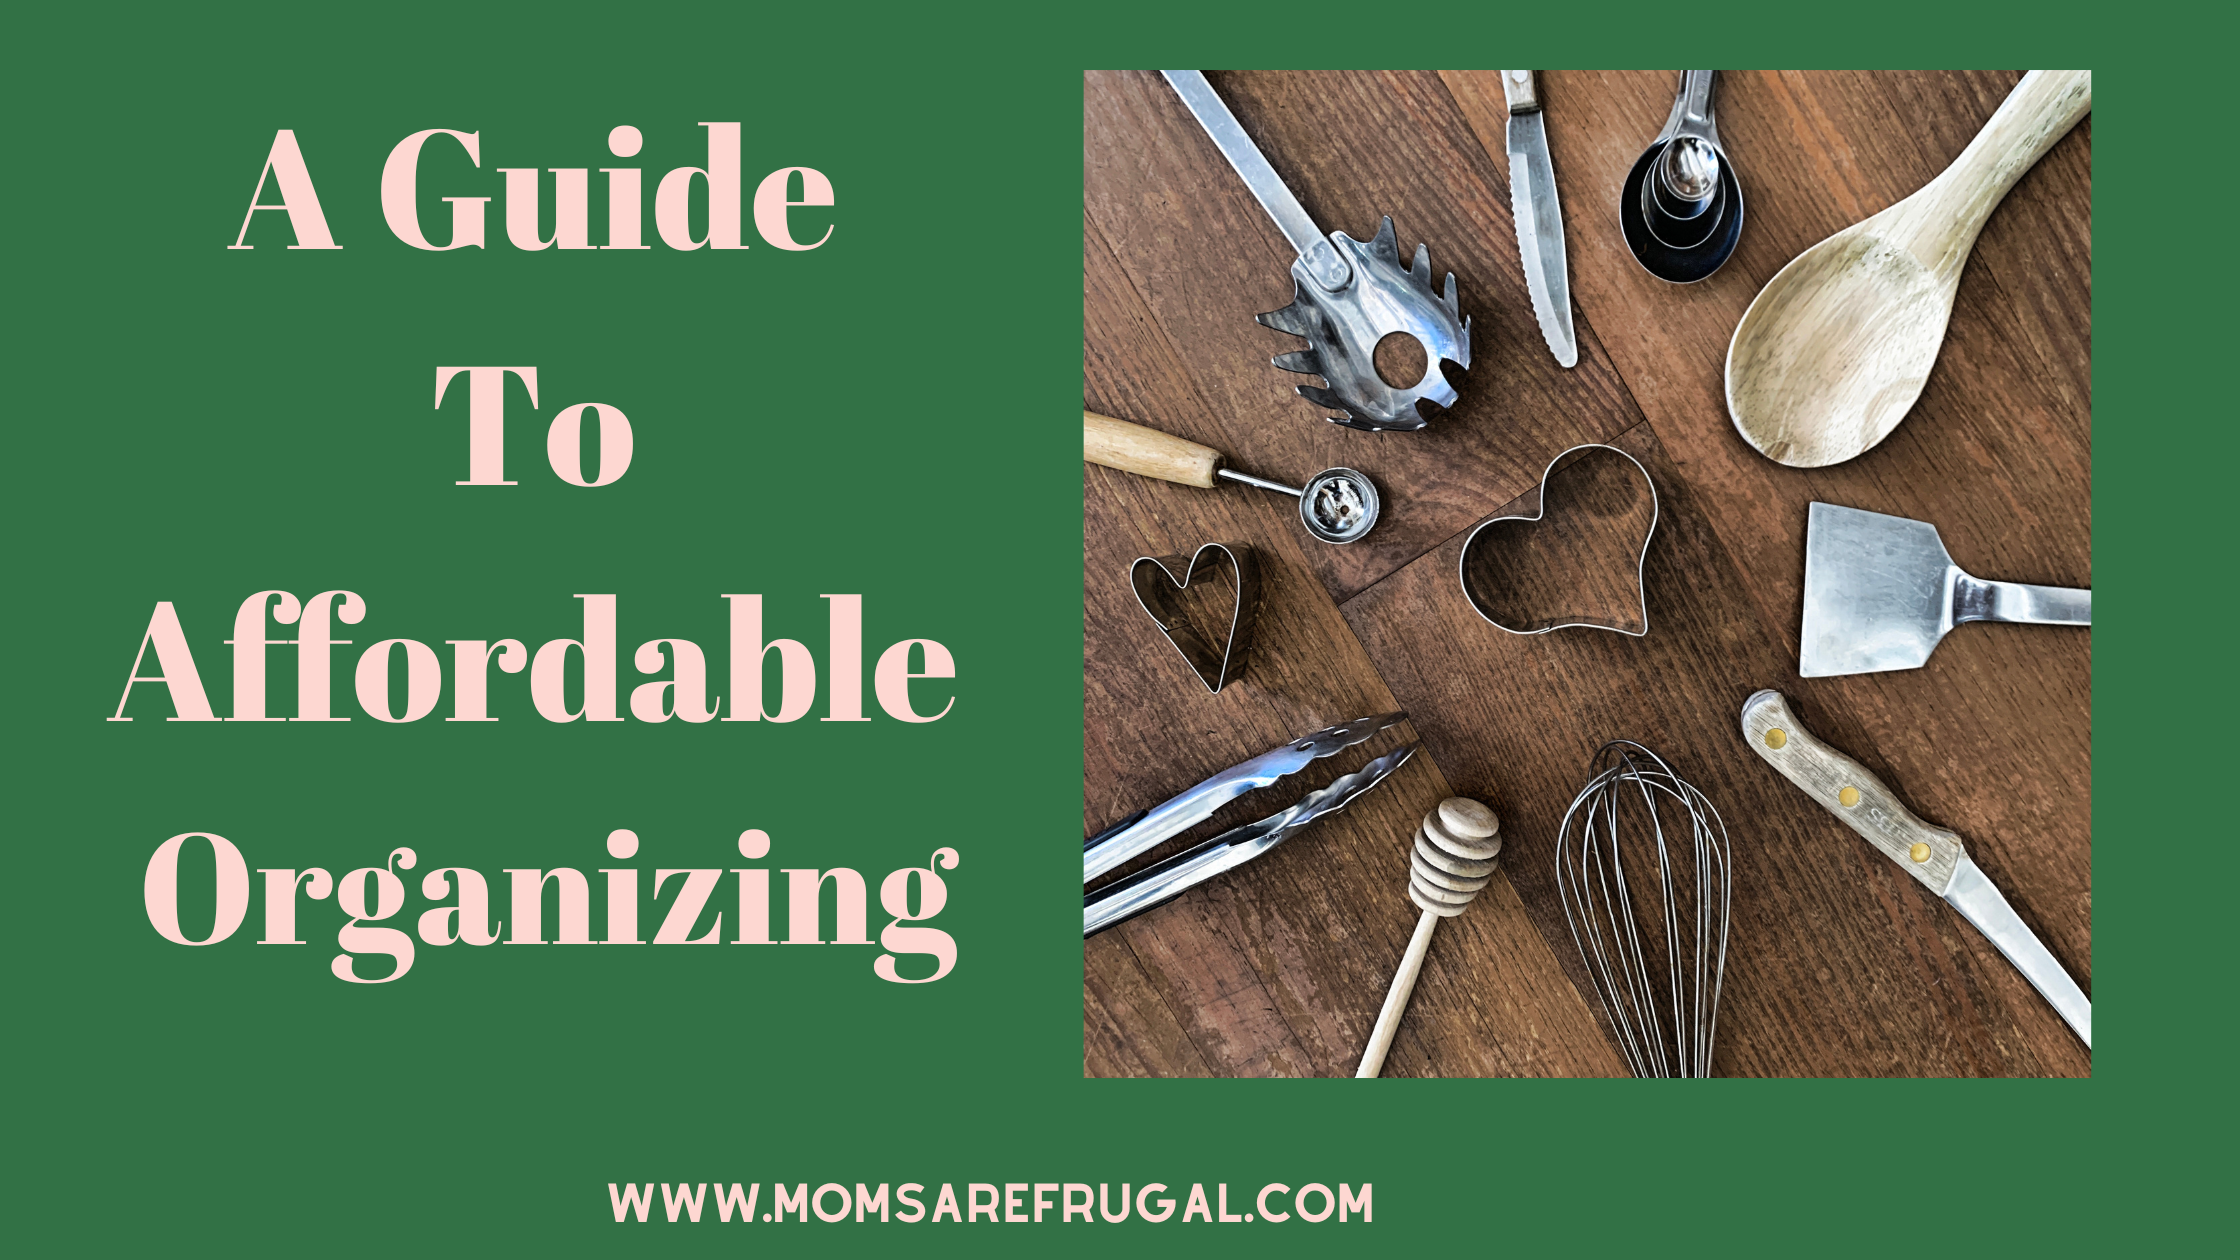 A Guide To Affordable Organizing